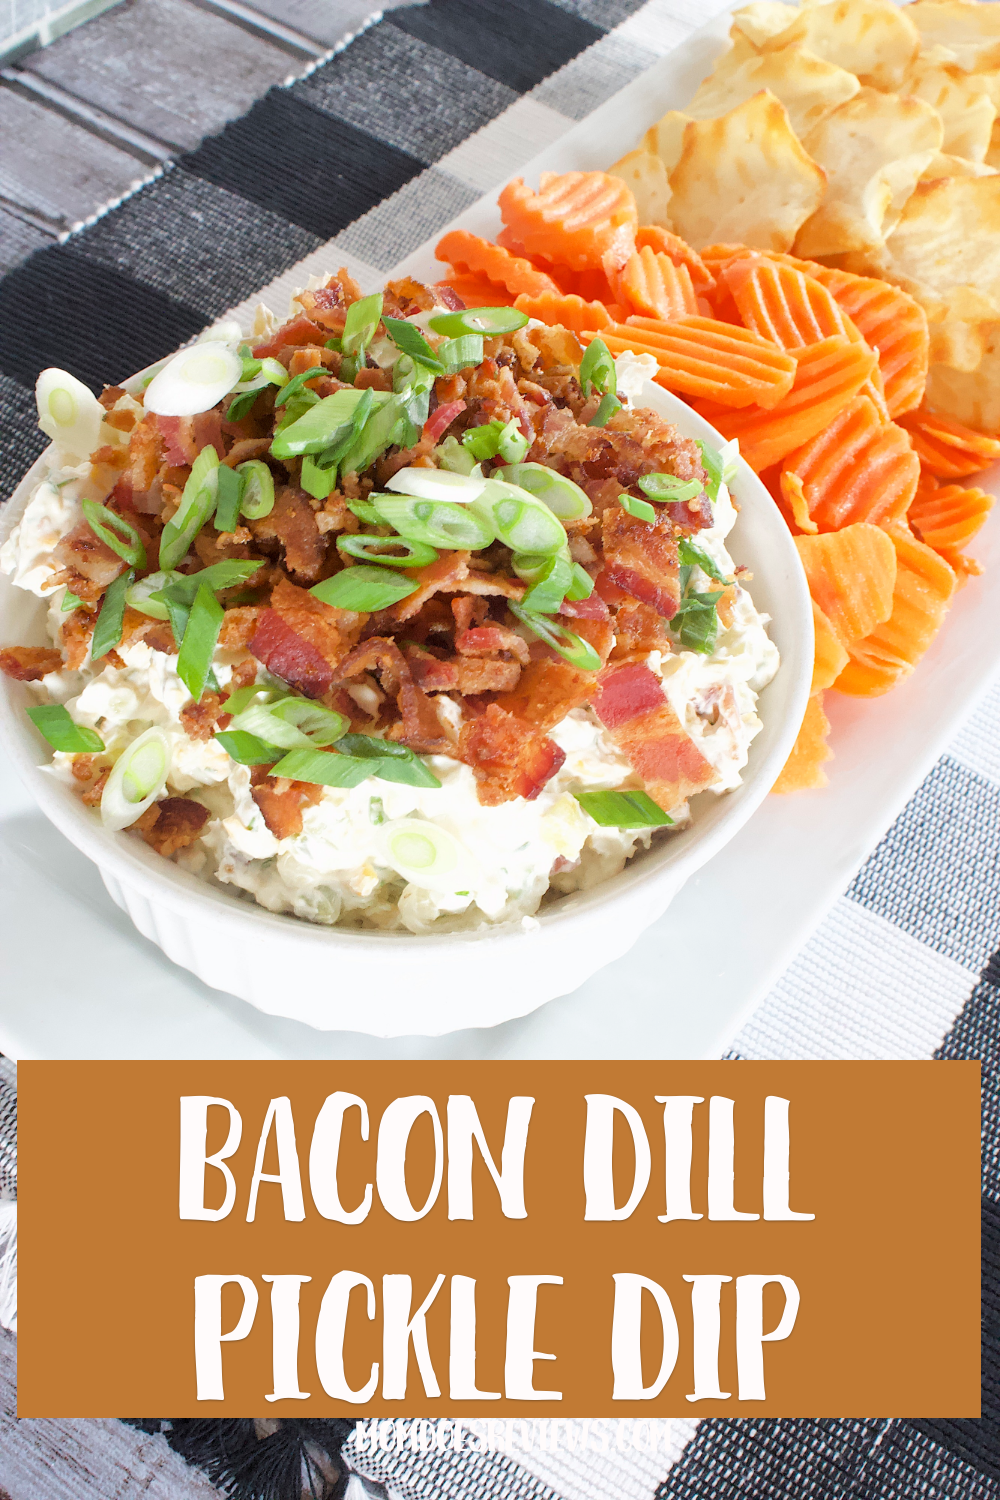 Bacon Dill Pickle Dip